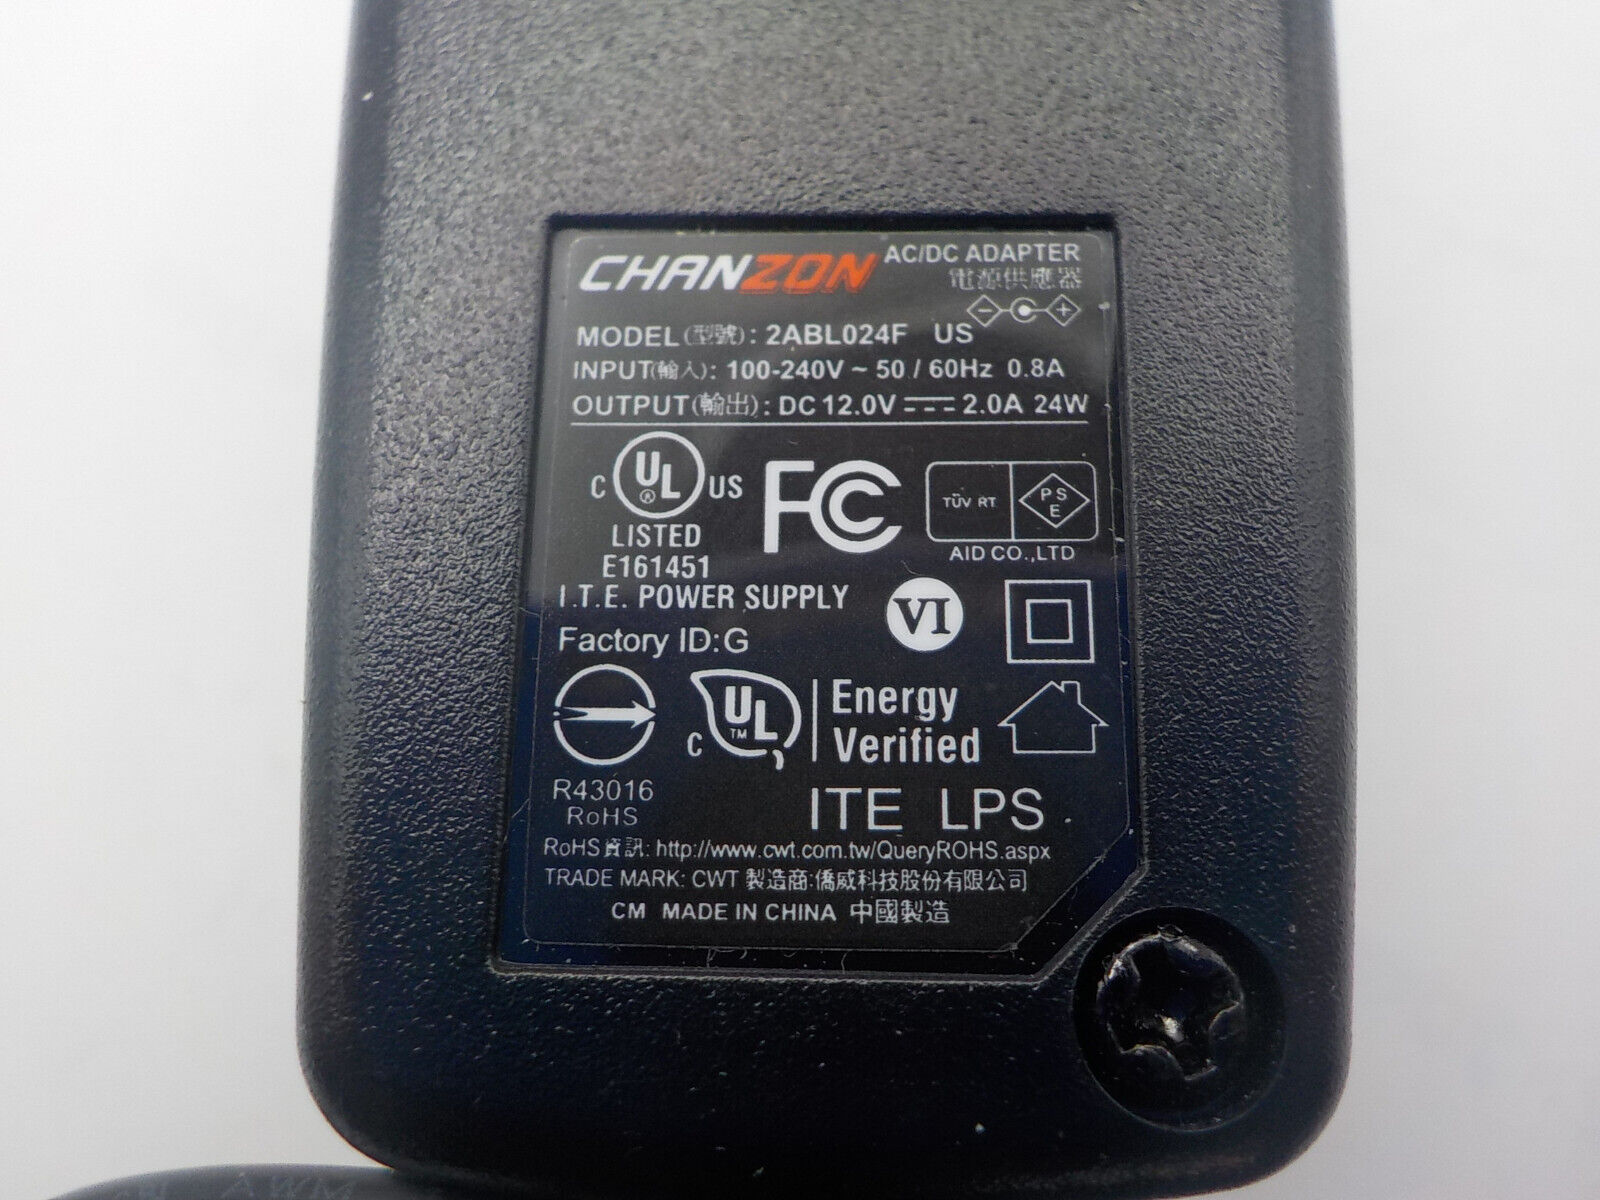 Chanzon 12V 2A UL Listed 24W AC DC Switching Power Supply Adapter BLACK 